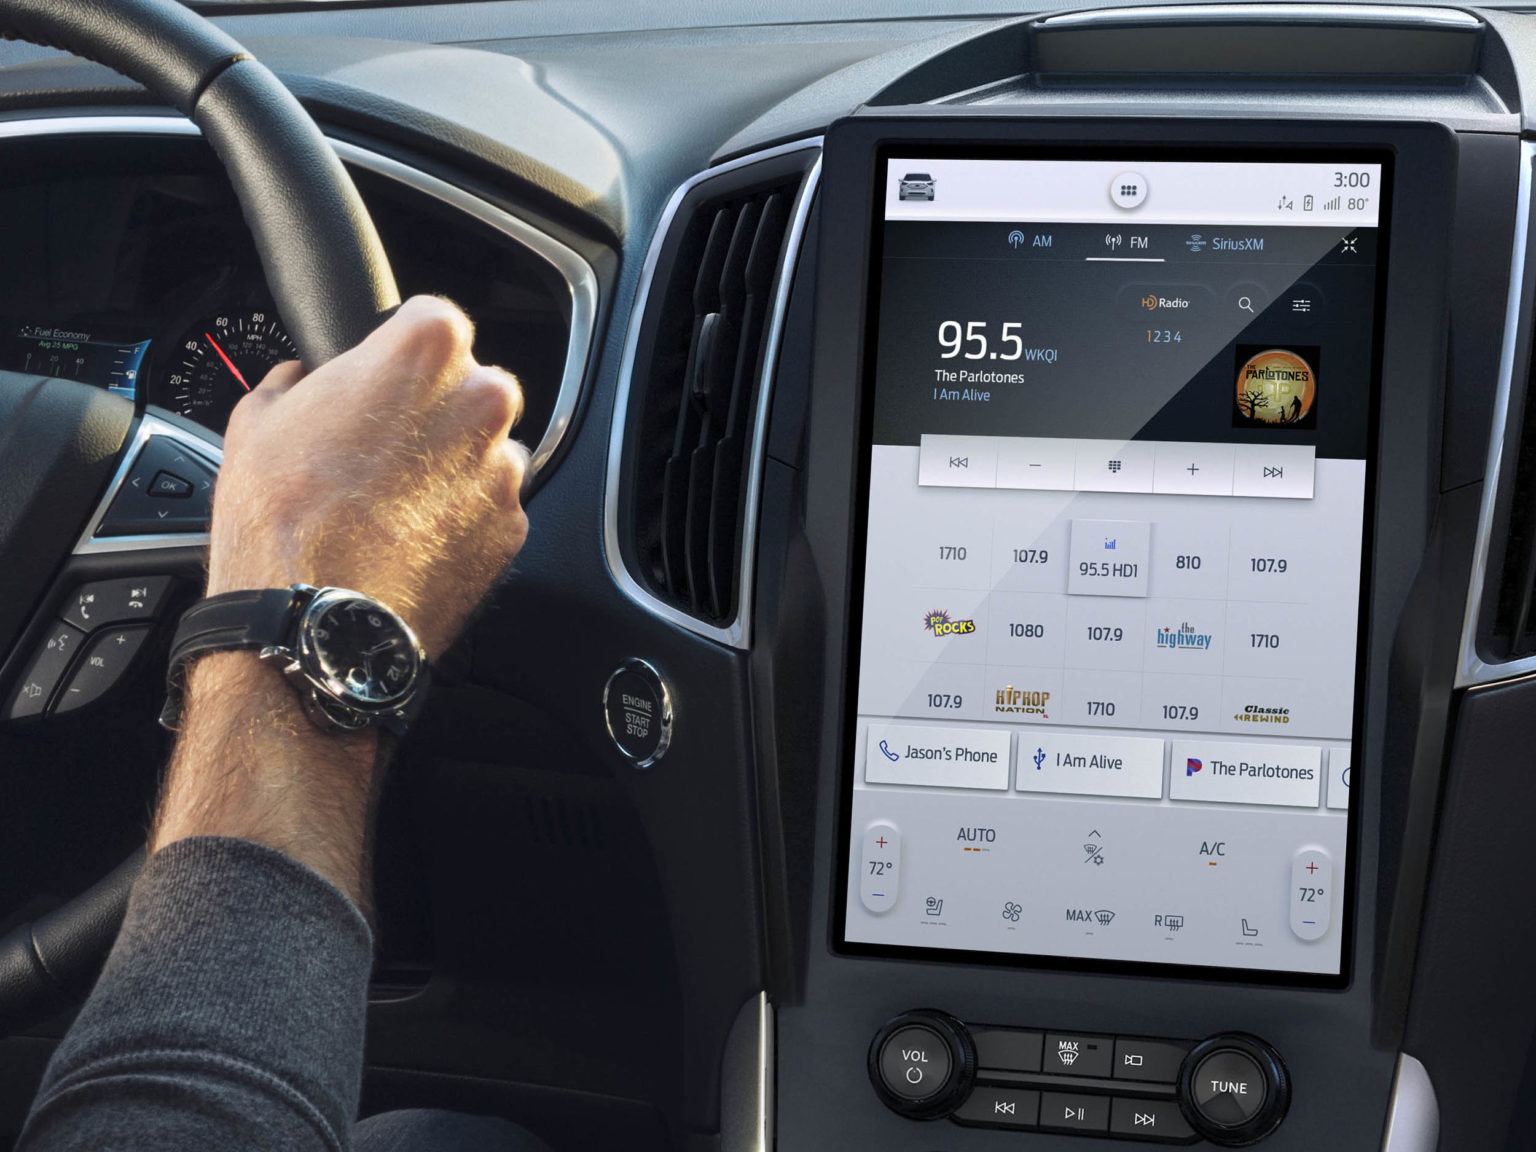 The Edge now has an available 12-inch infotainment screen.